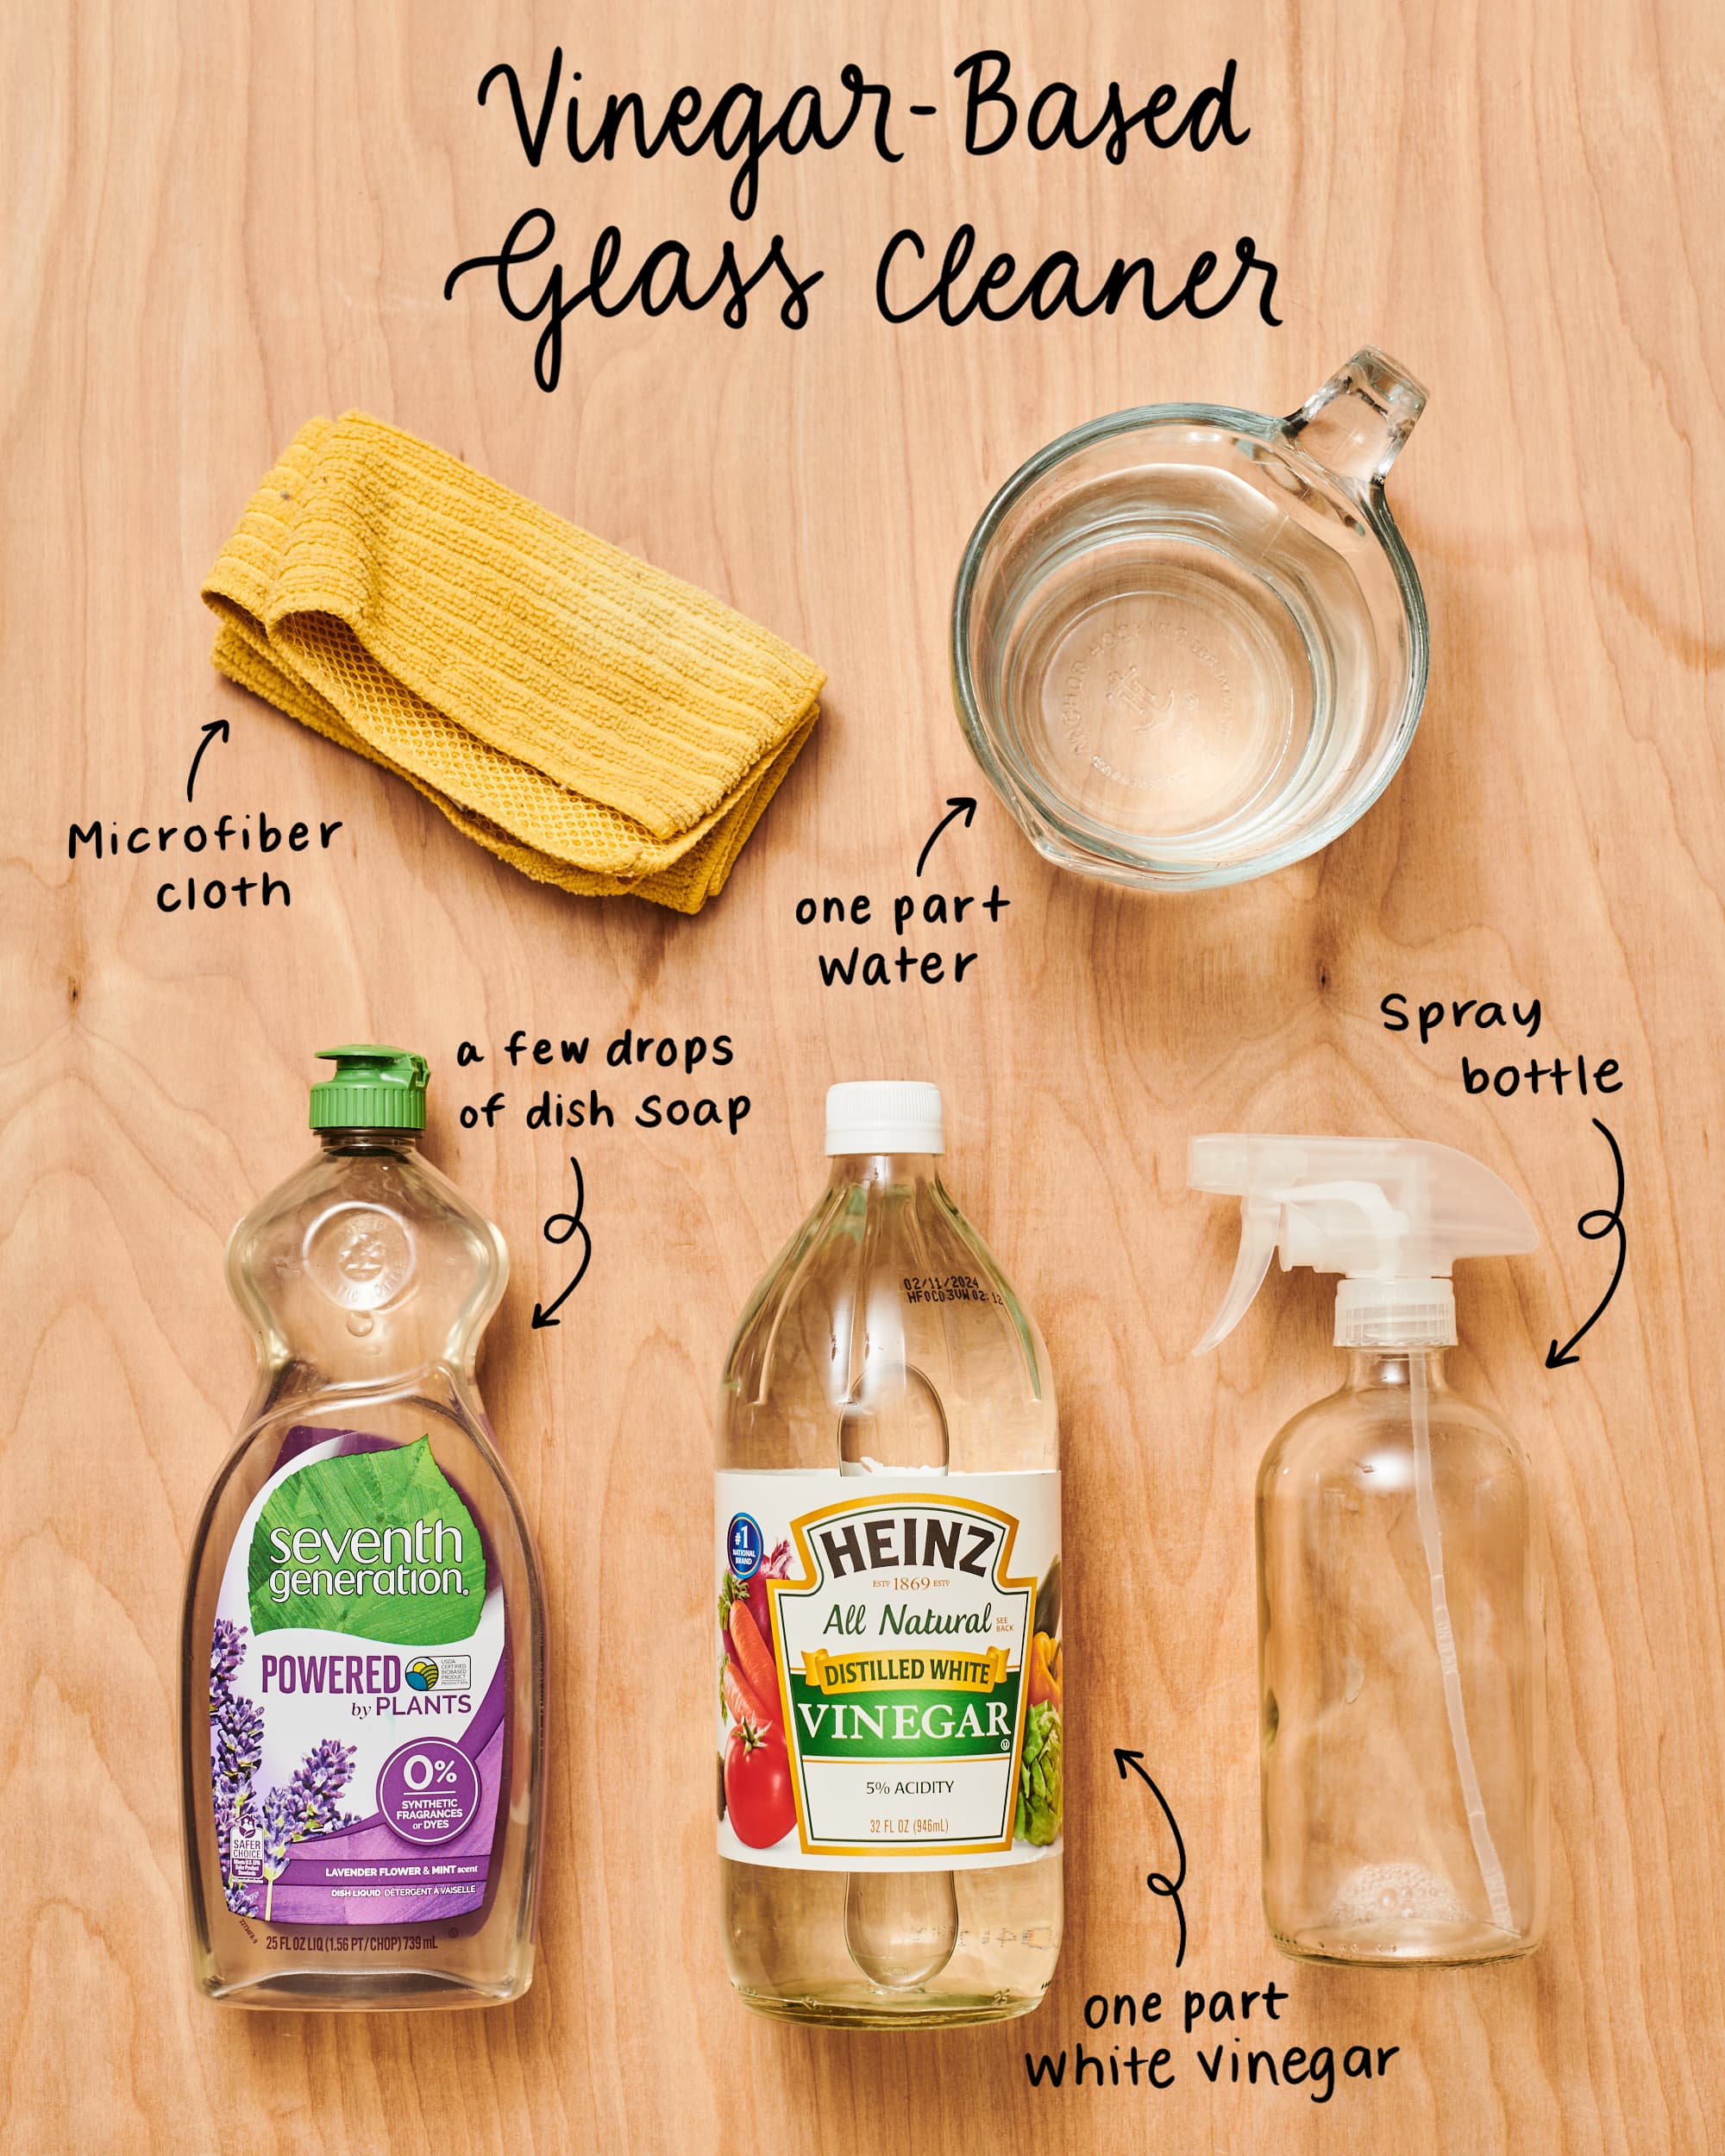 Glass Plus Glass Cleaner, 32 FL Oz Bottle, Multi-Surface Glass Cleaner  (Pack of 5)